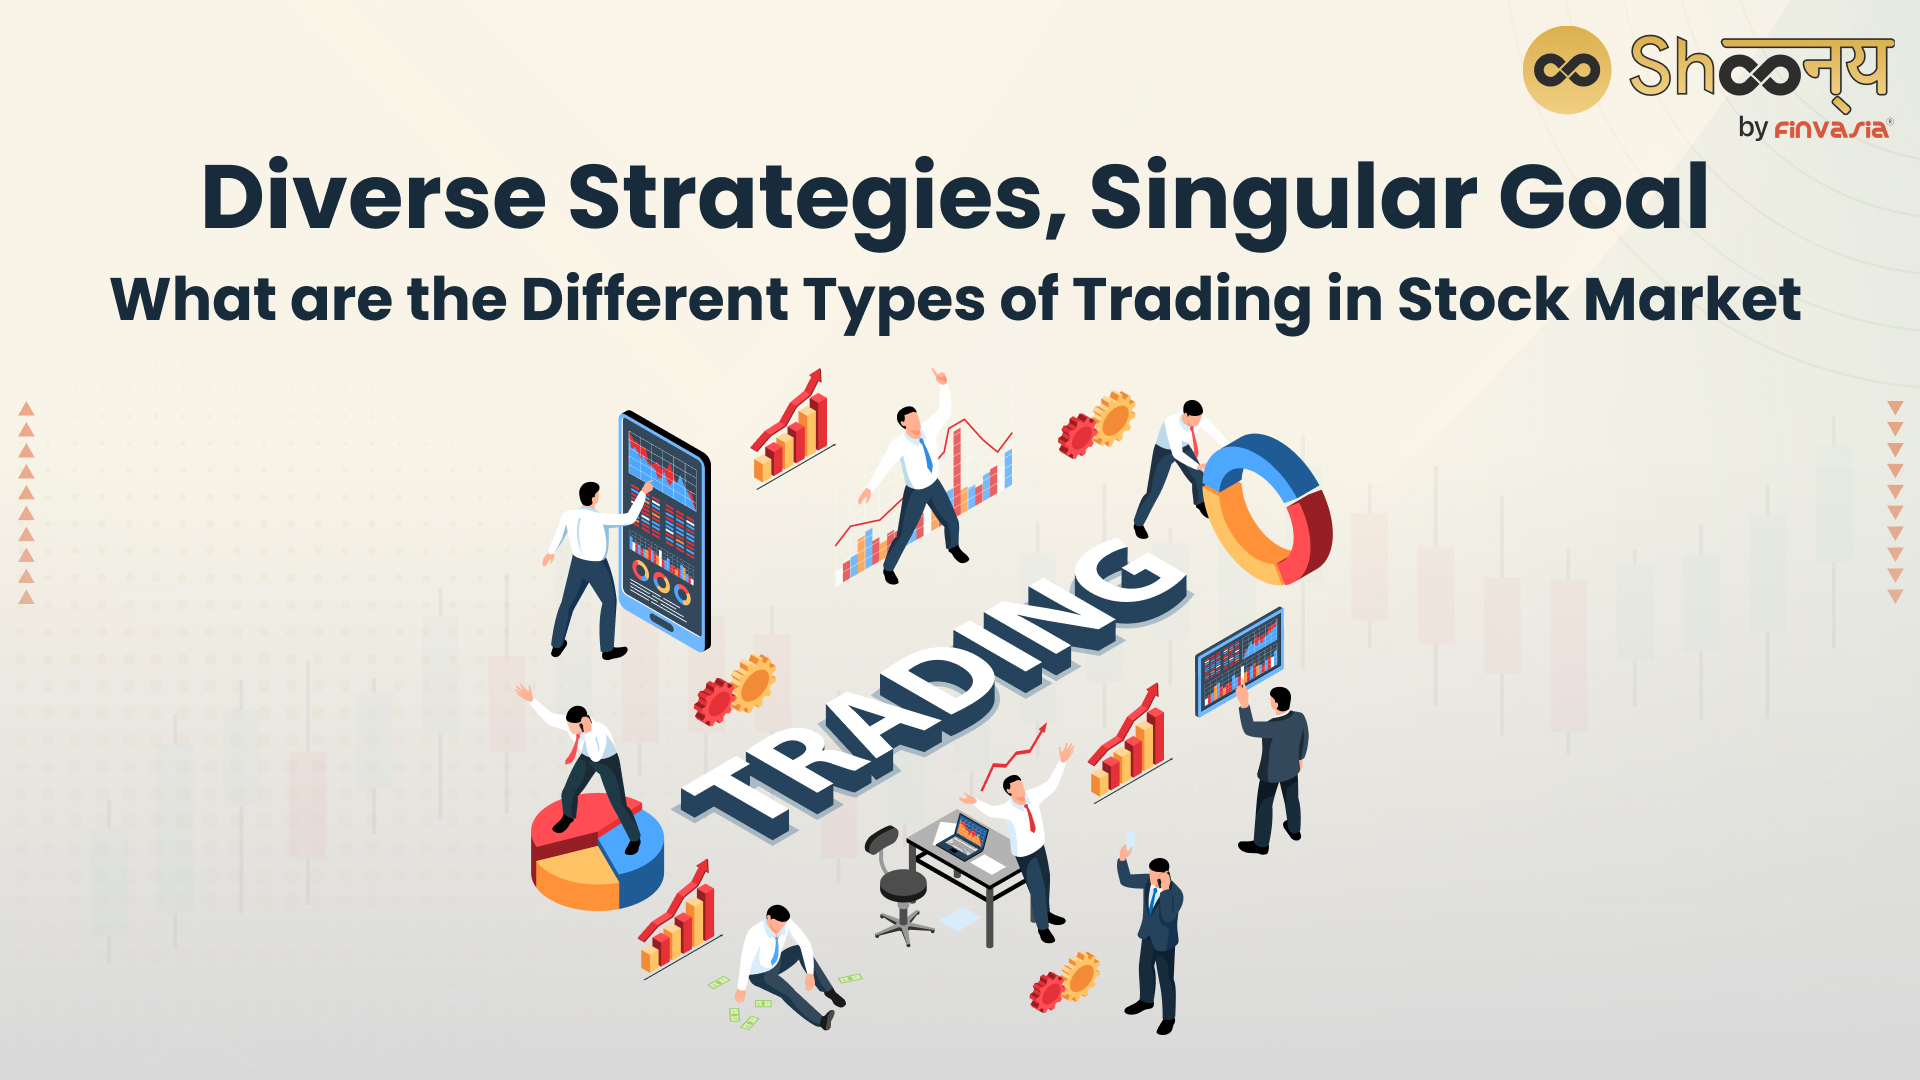 Explore Different Types of Trading in the Stock Market